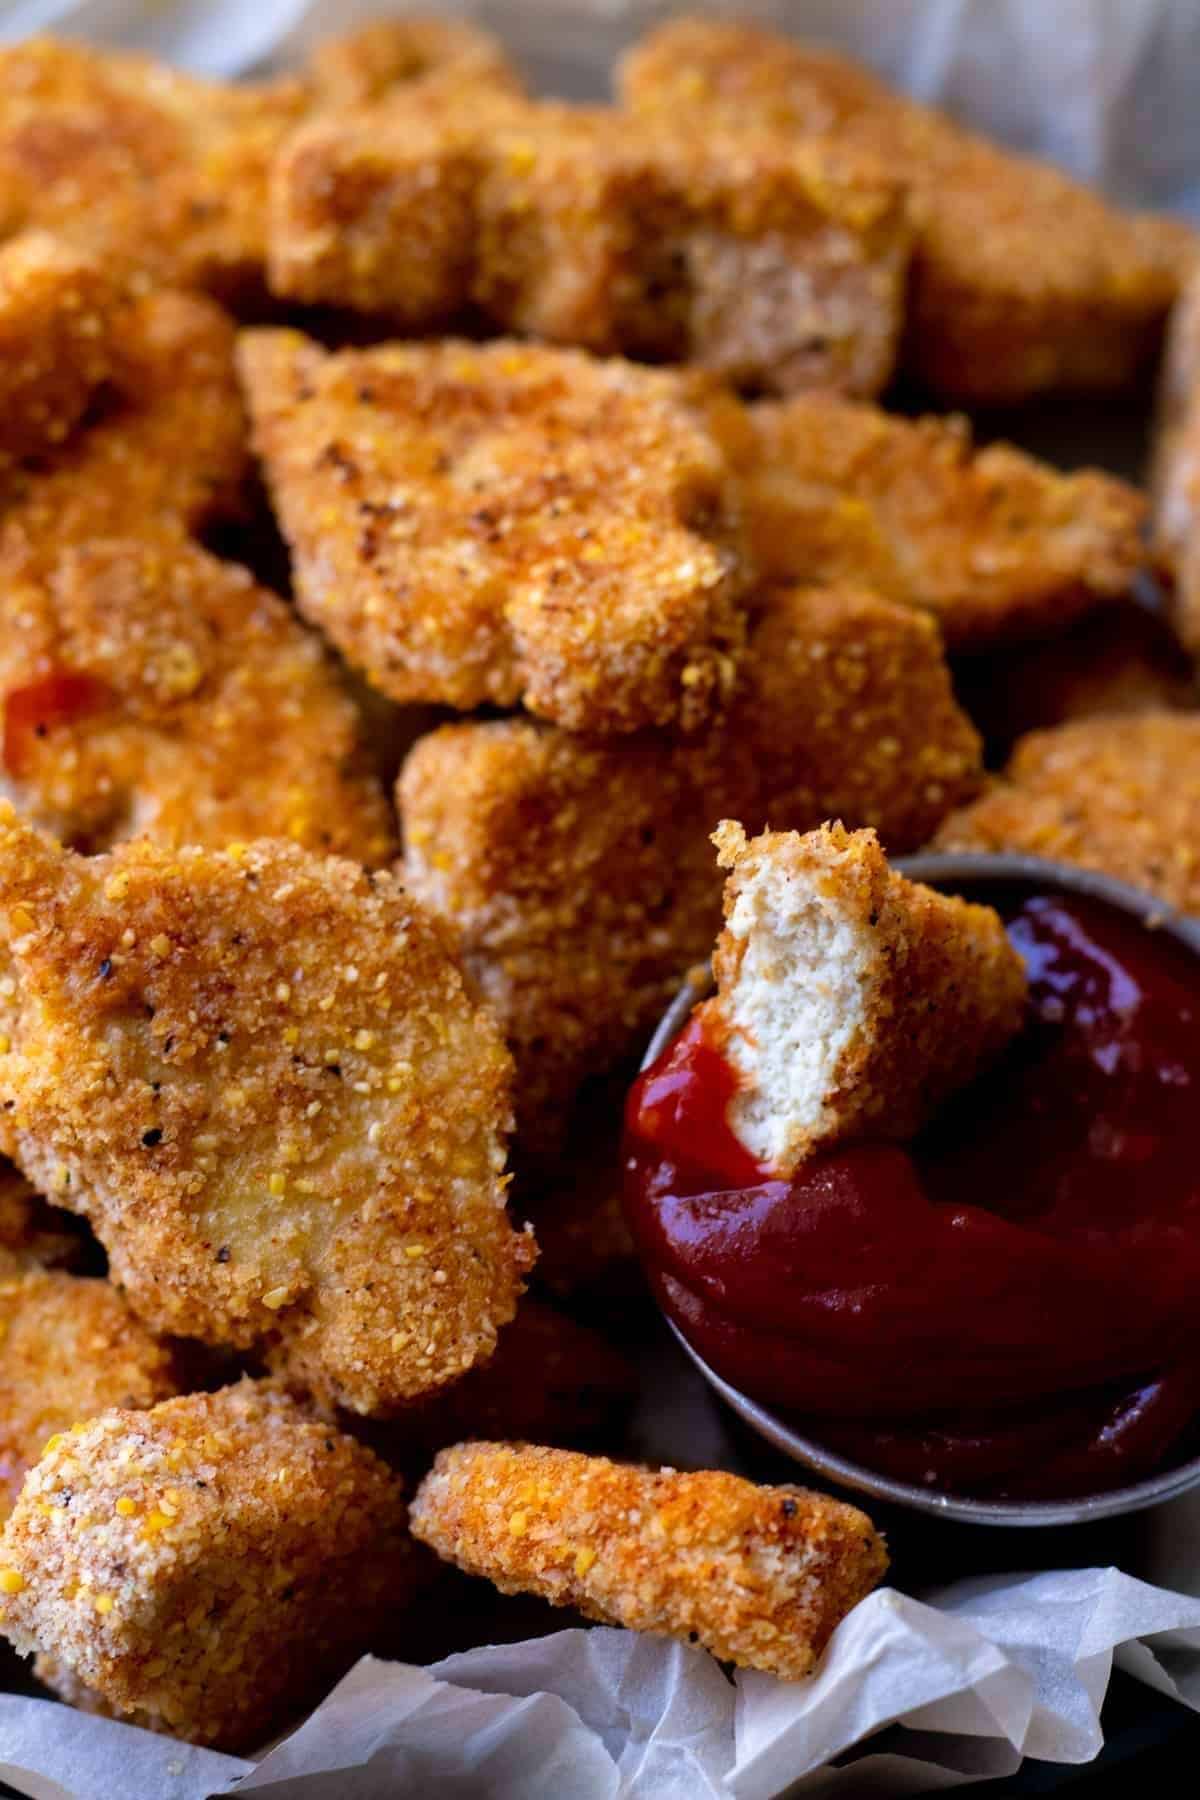 Tofu nuggets dunked in ketchup.